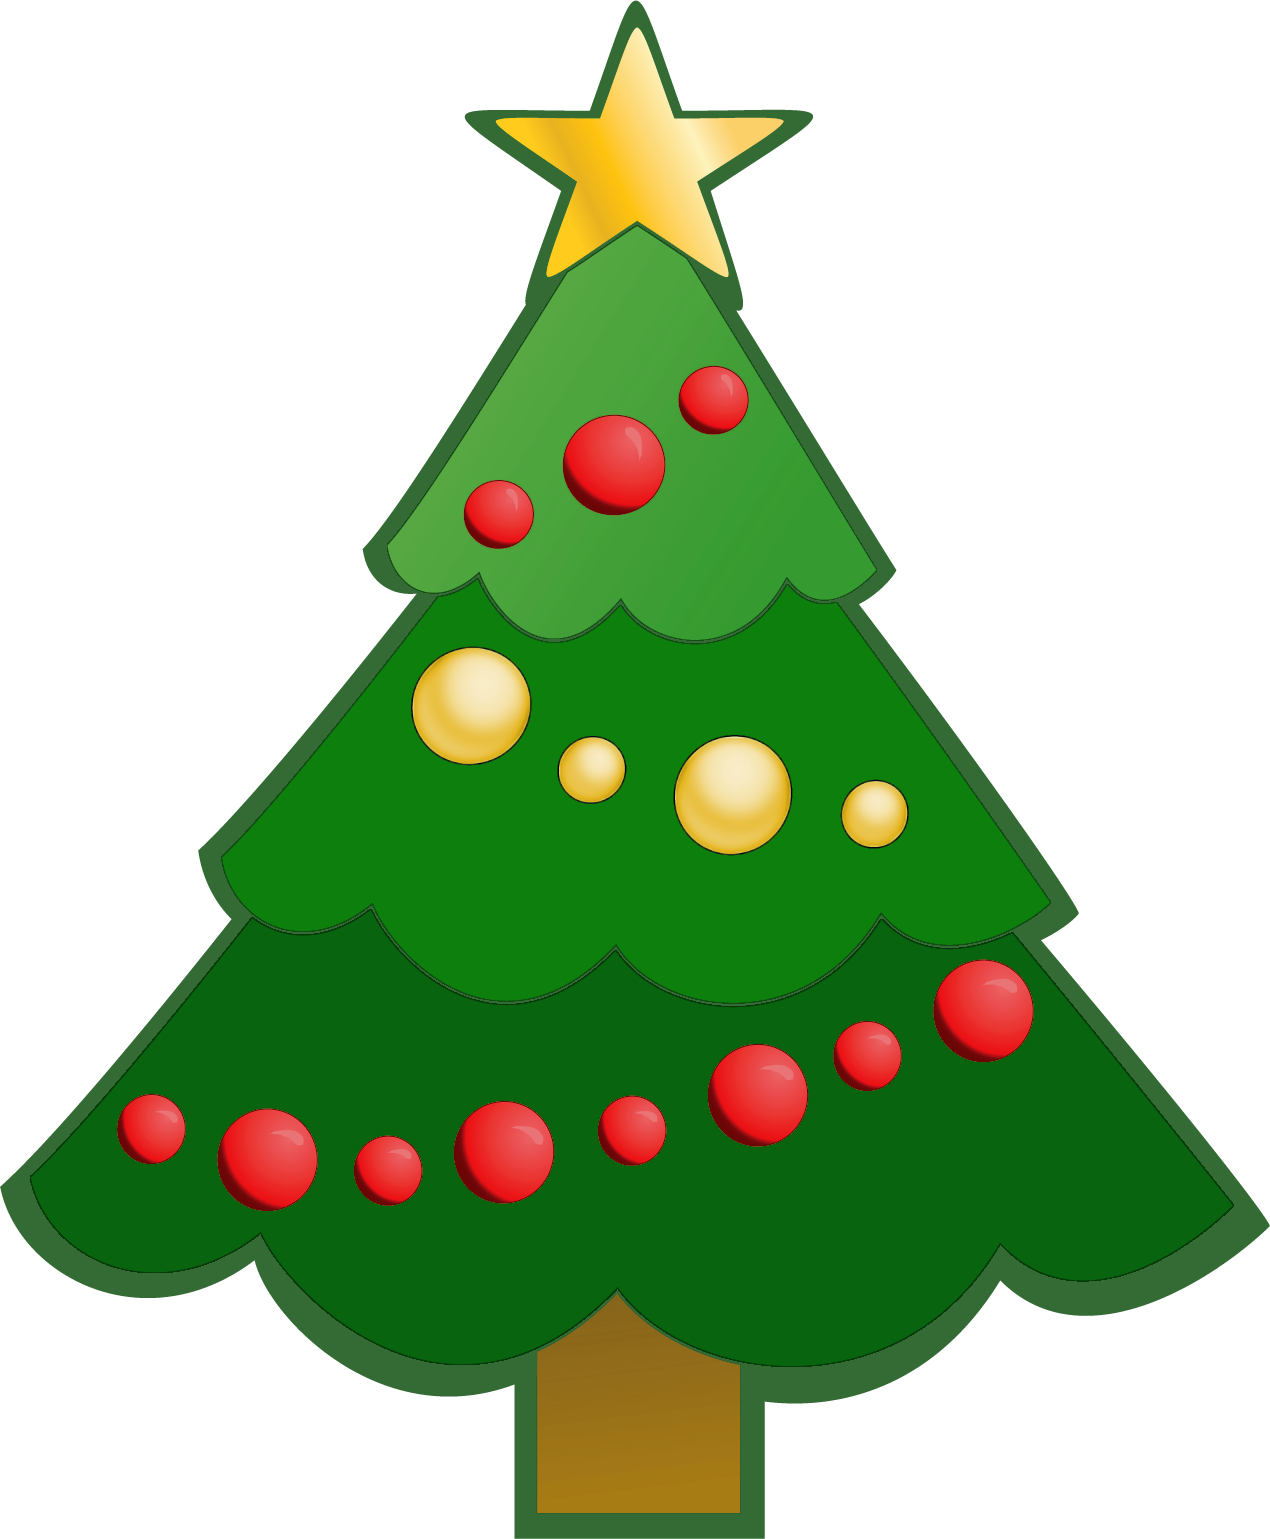 Green Simple Christmas Tree PNG Clipart